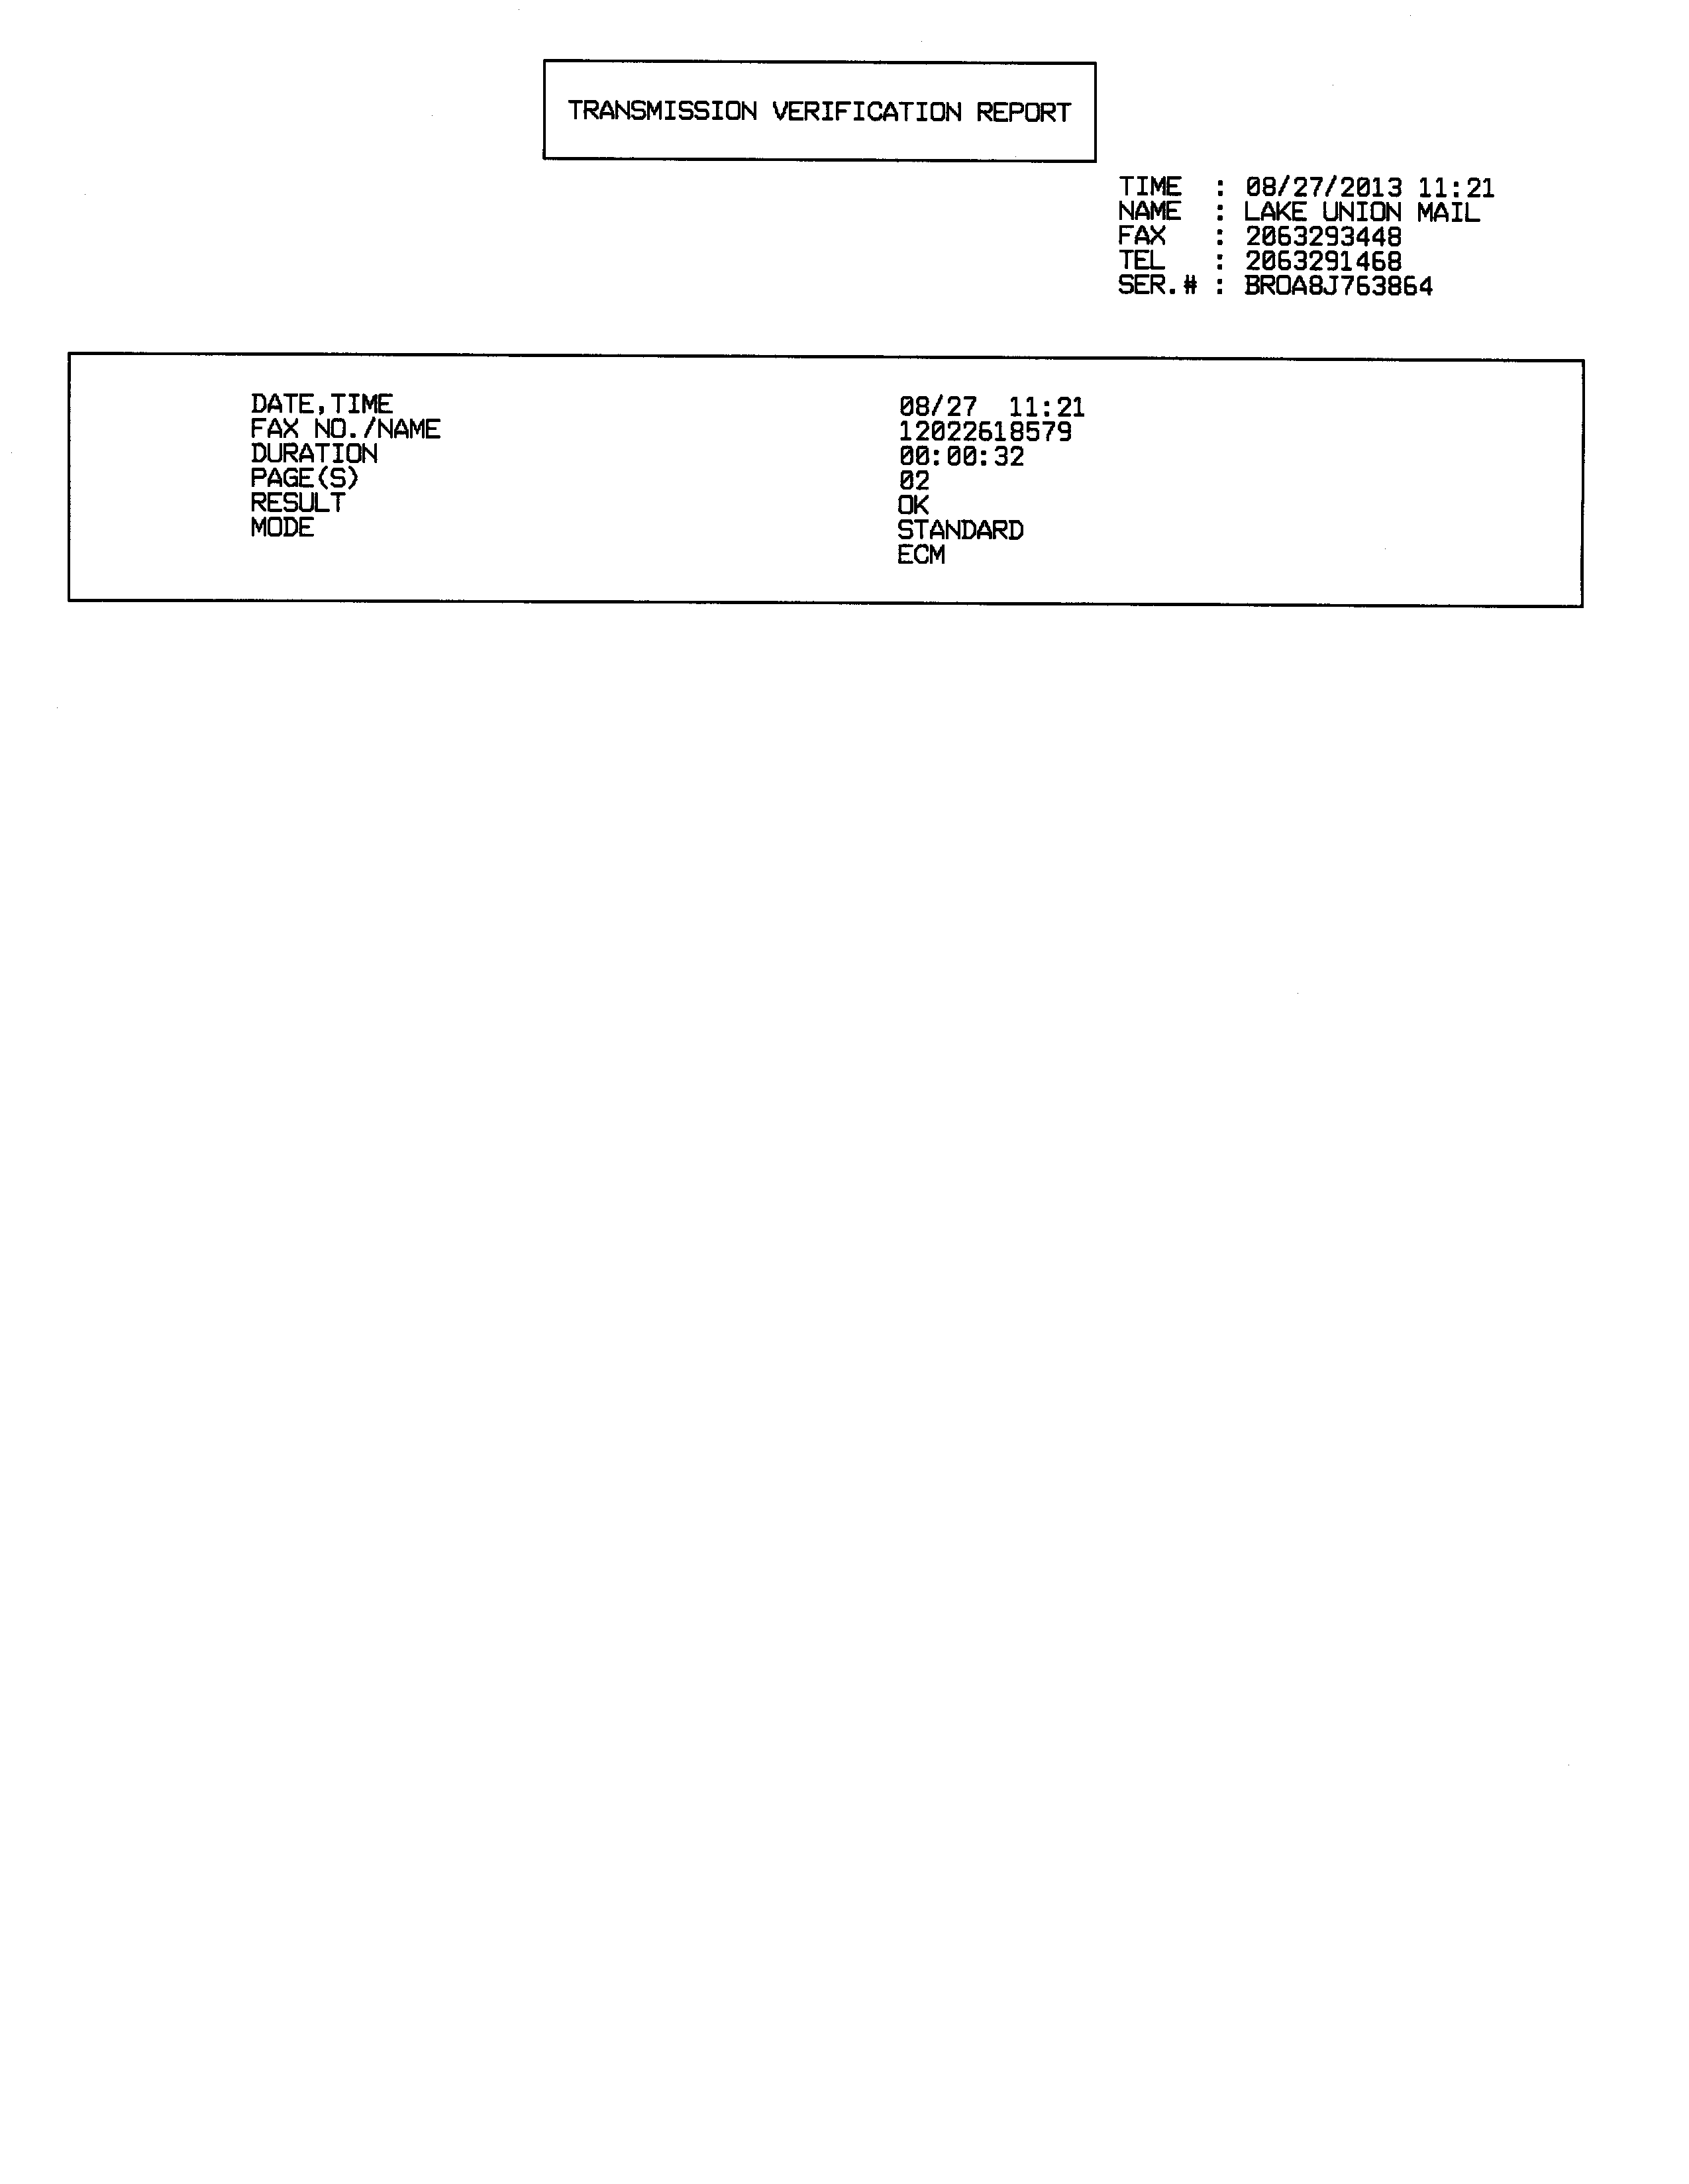 Fax Confirmation Template from supremelaw.org